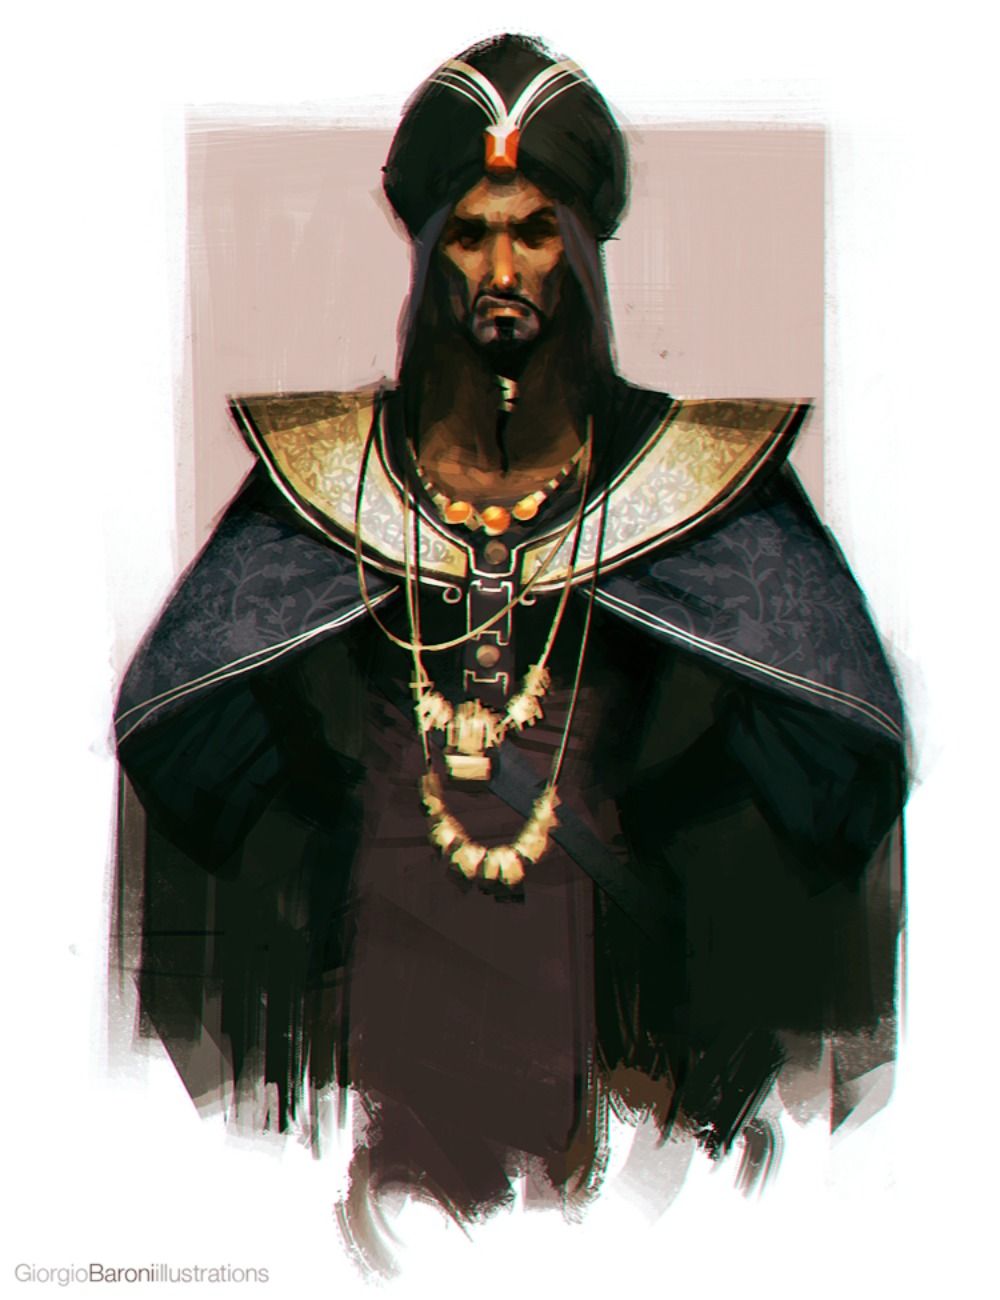 Aladdin: 10 Fan Art Pieces Of Jafar That Will Give You The Chills